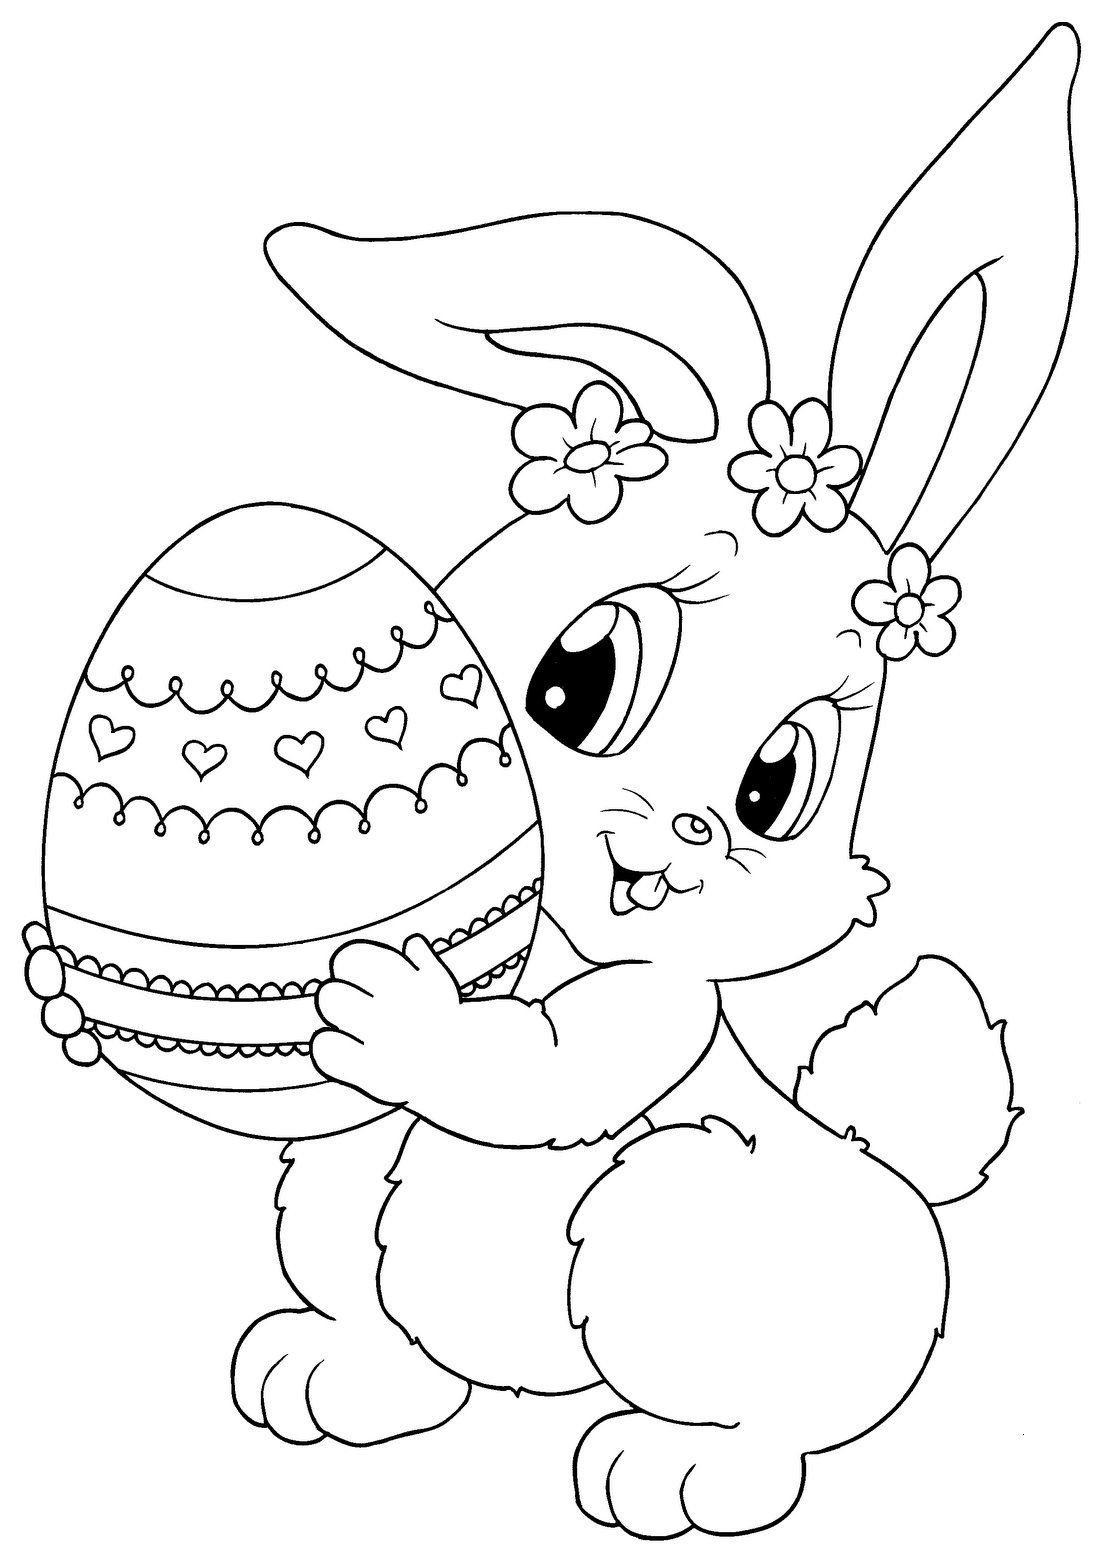 Easter Bunny Coloring Pages Free Printable
 Top 15 Free Printable Easter Bunny Coloring Pages line